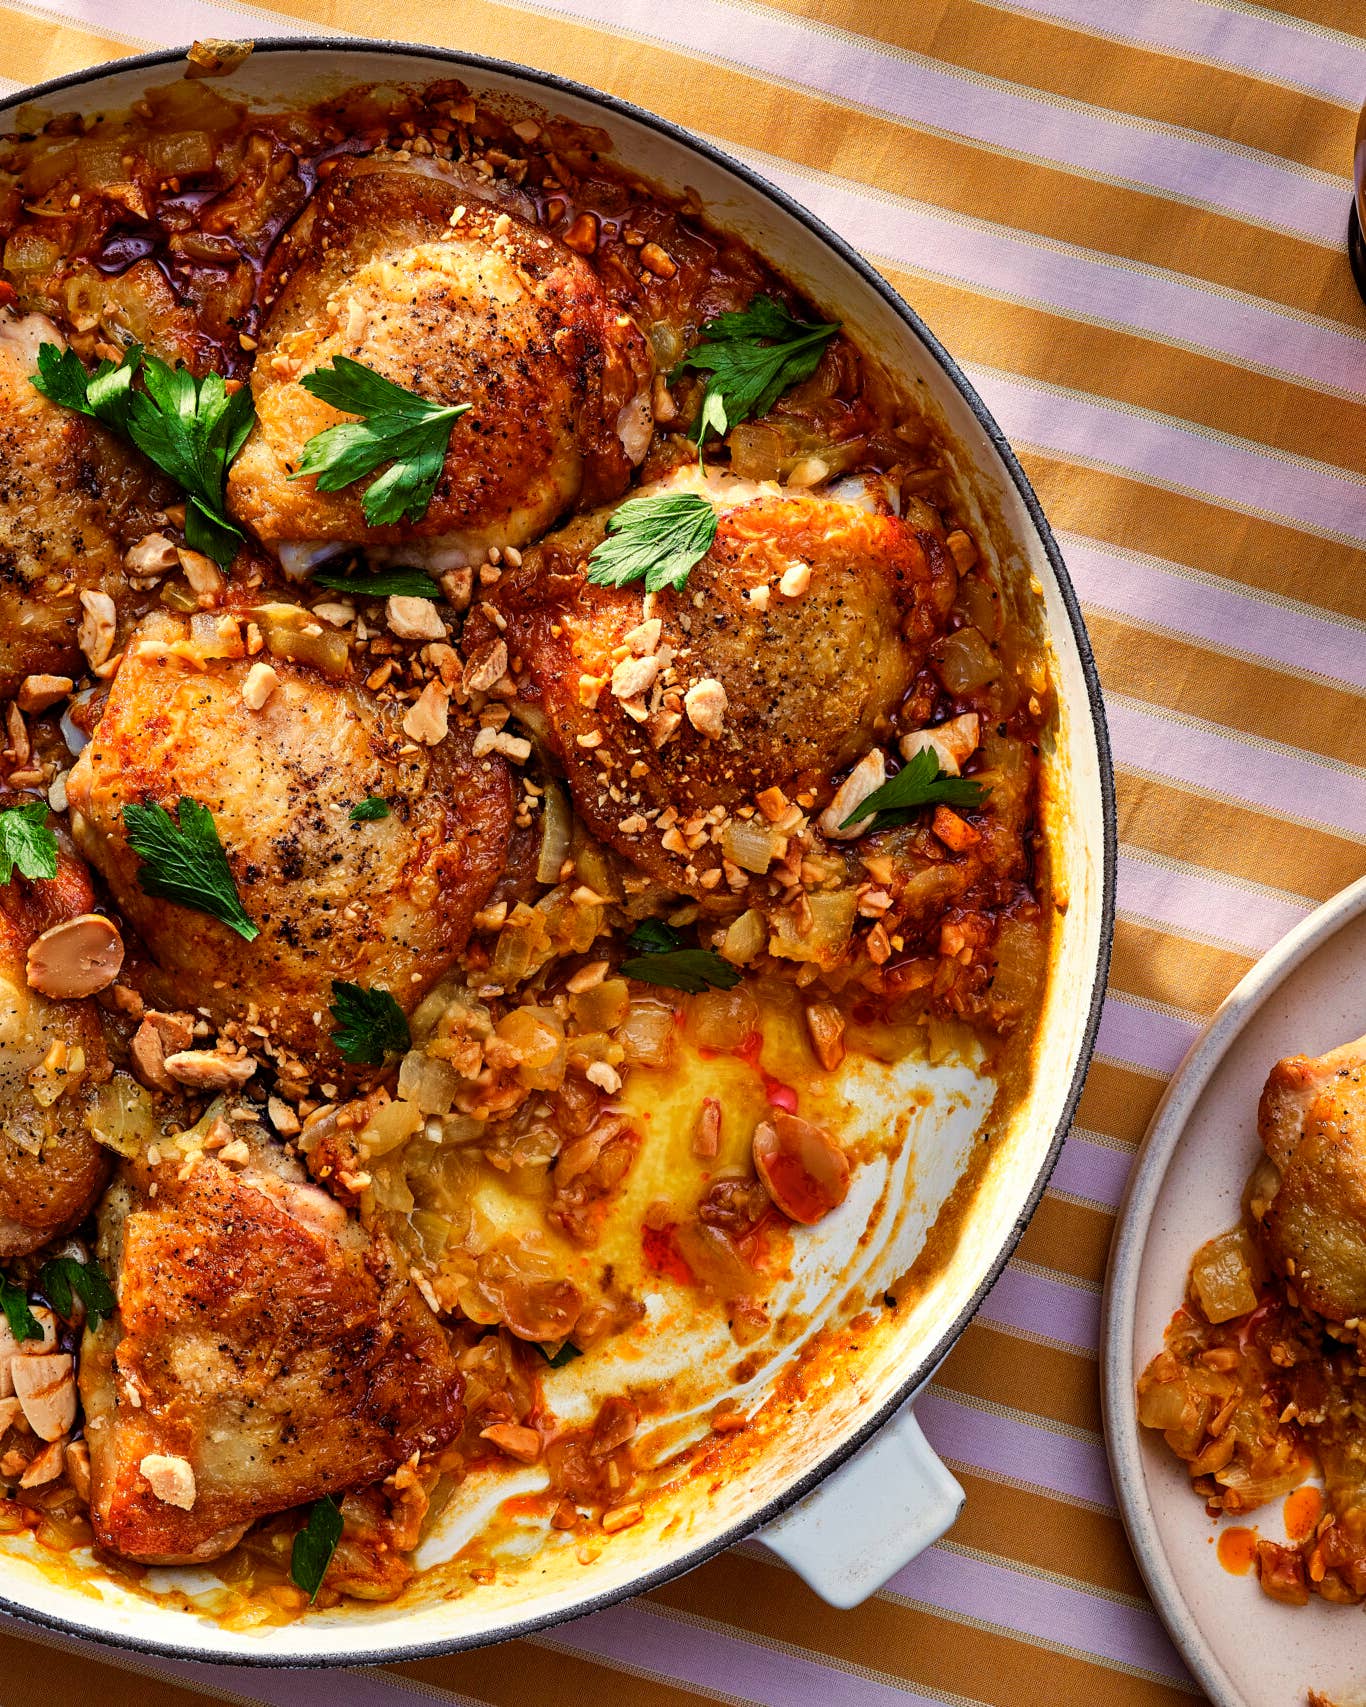 19 Easy One-Pot Meal Recipes to Make This Winter